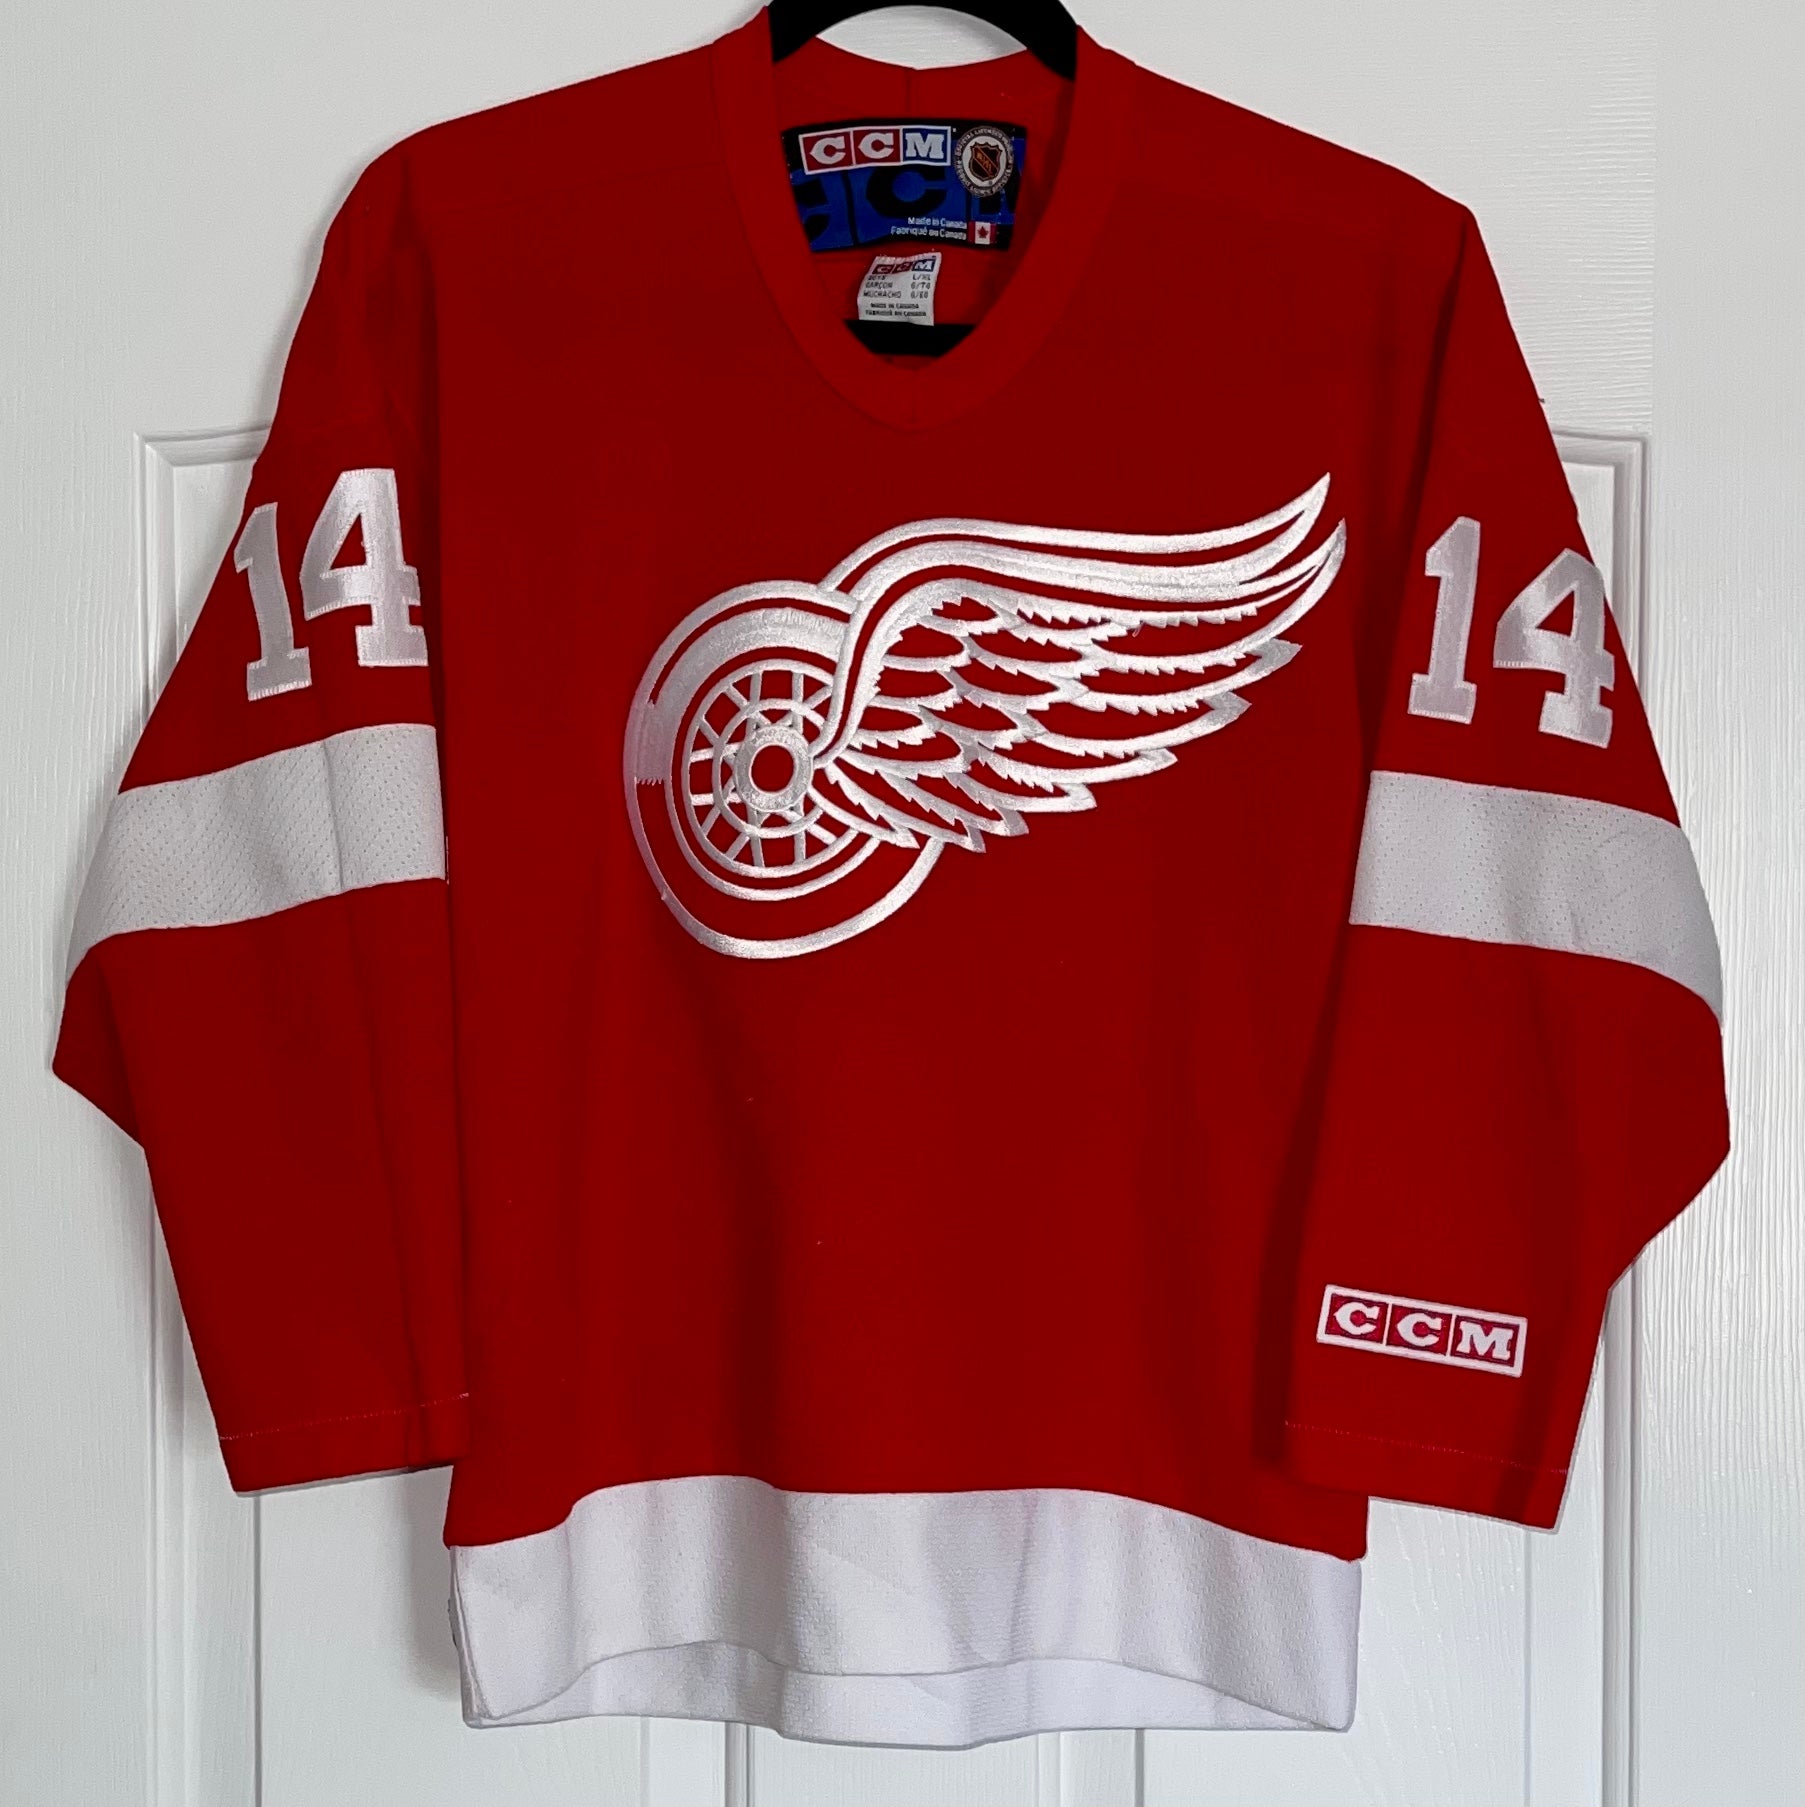 2000-07 DETROIT RED WINGS SHANAHAN #14 CCM JERSEY (HOME) Y